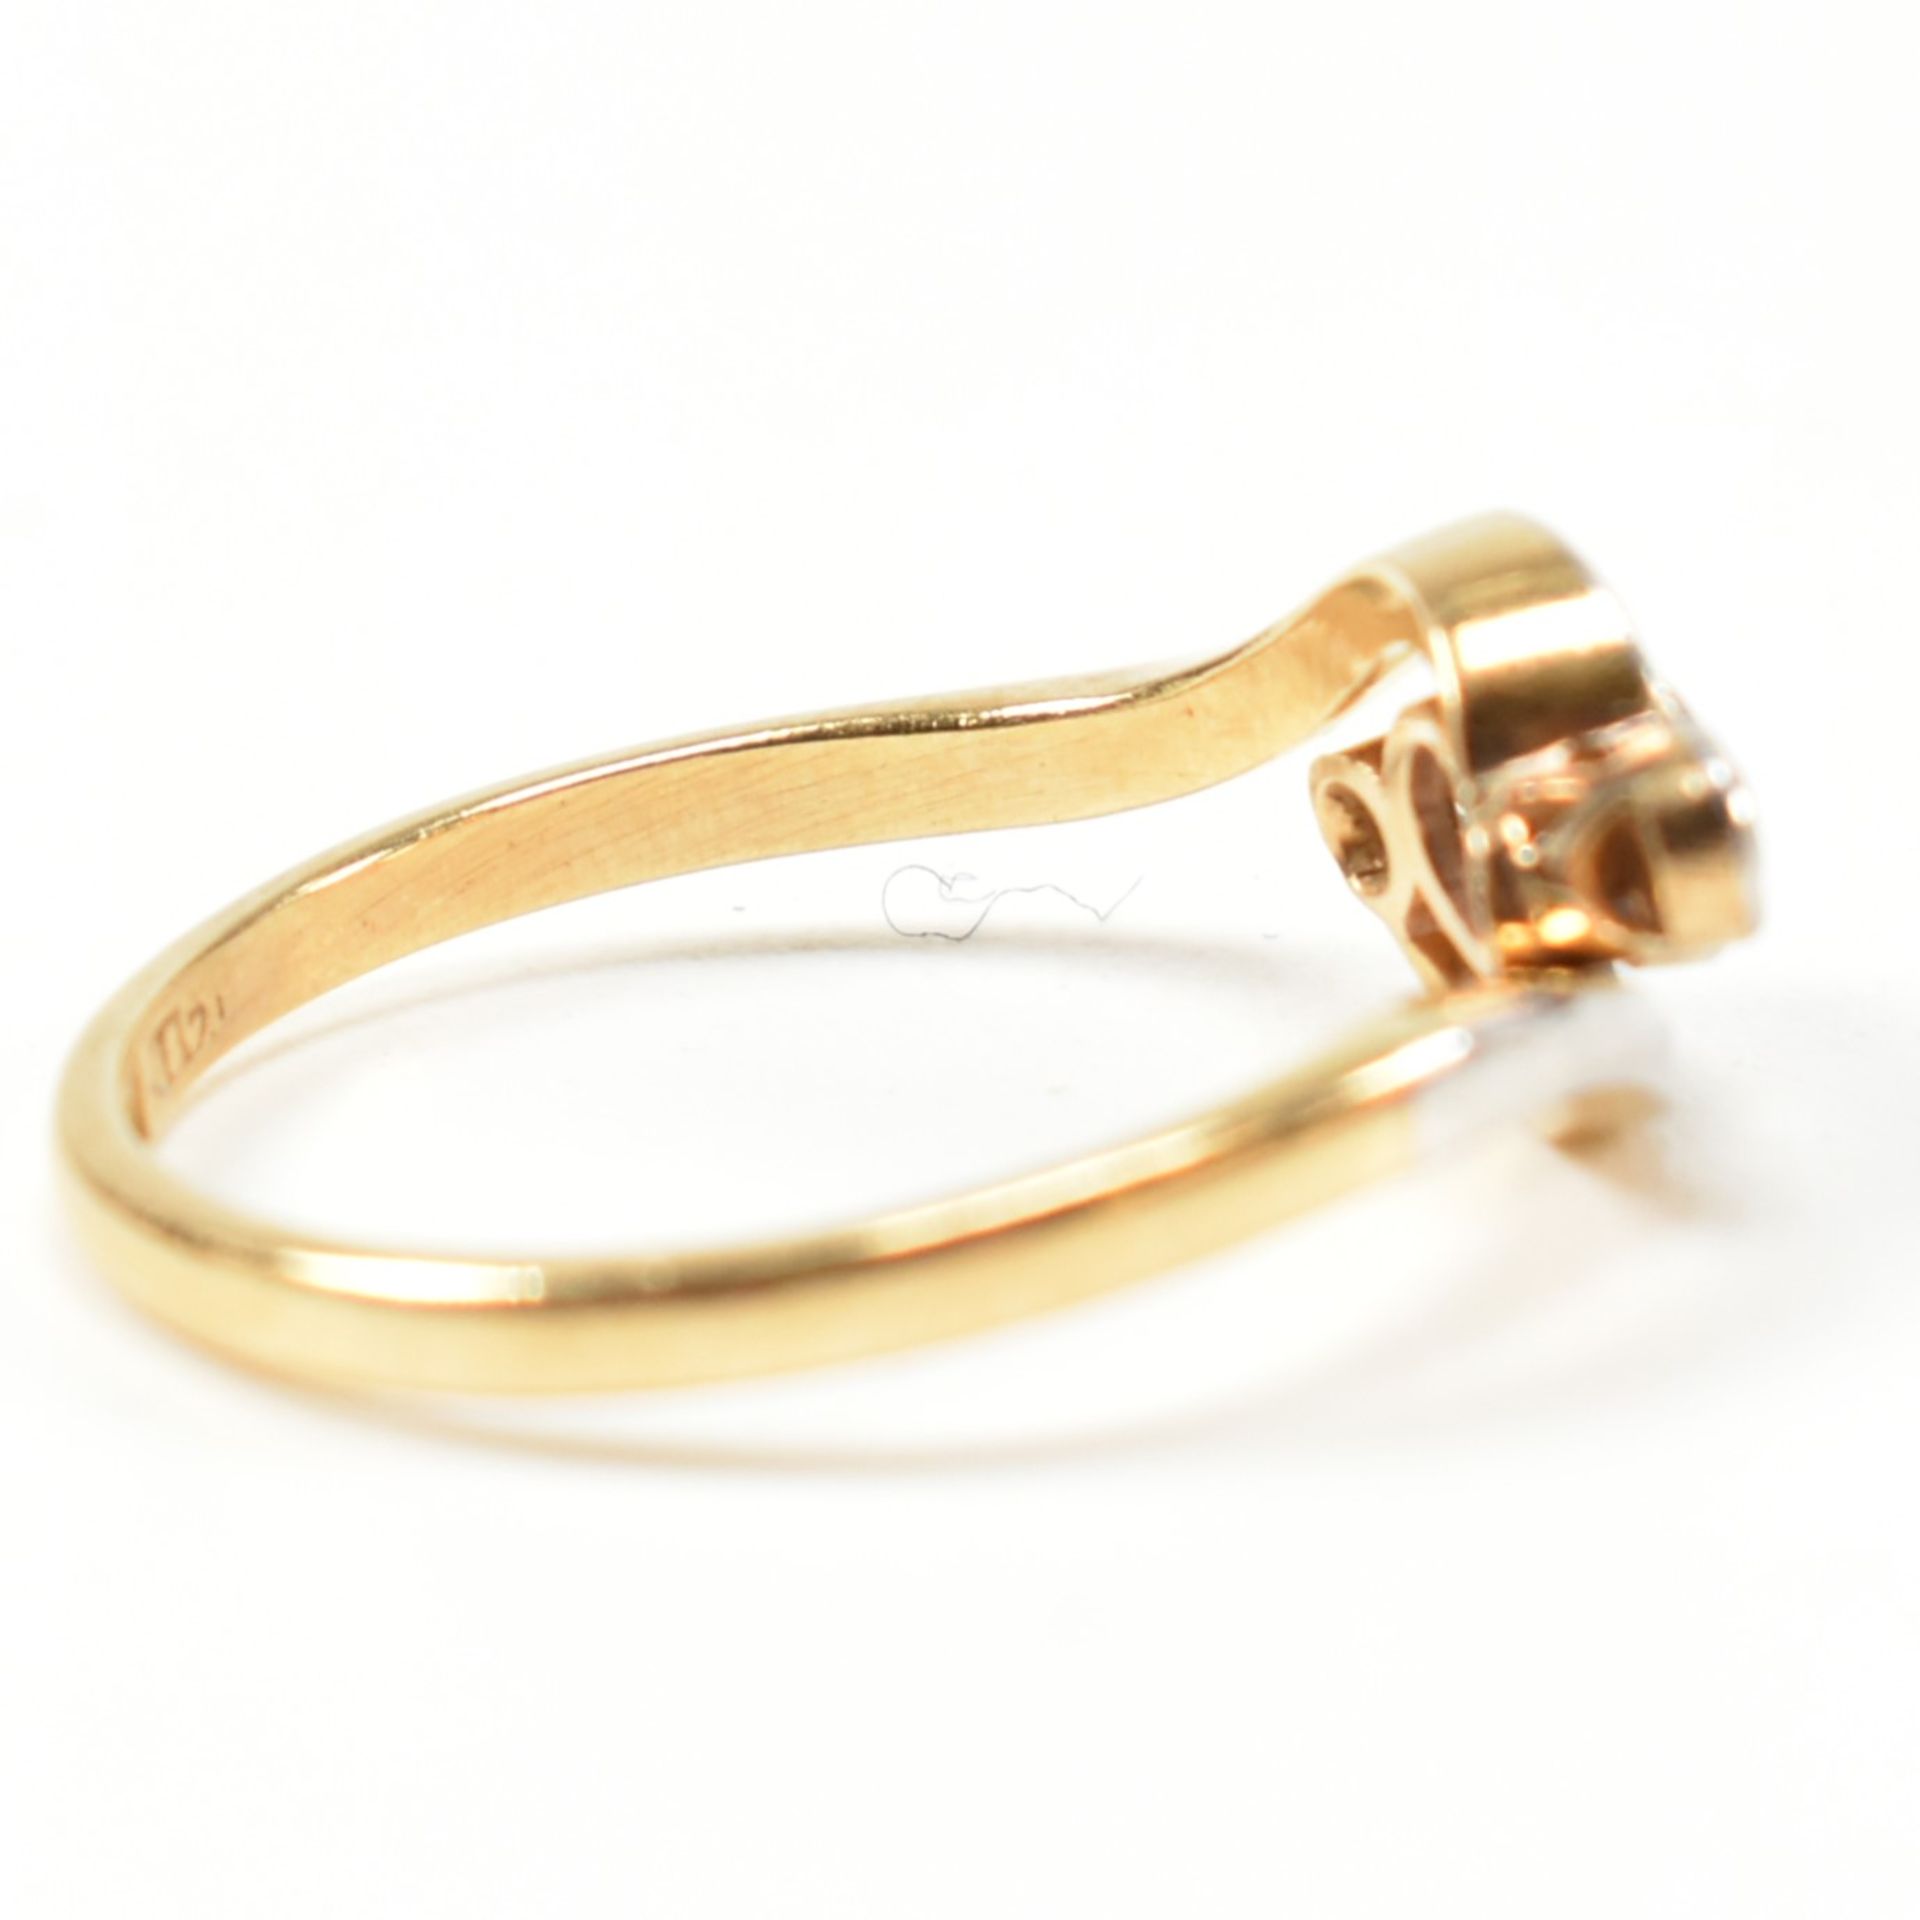 18CT GOLD DIAMOND & SAPPHIRE CROSSOVER RING - Image 5 of 9